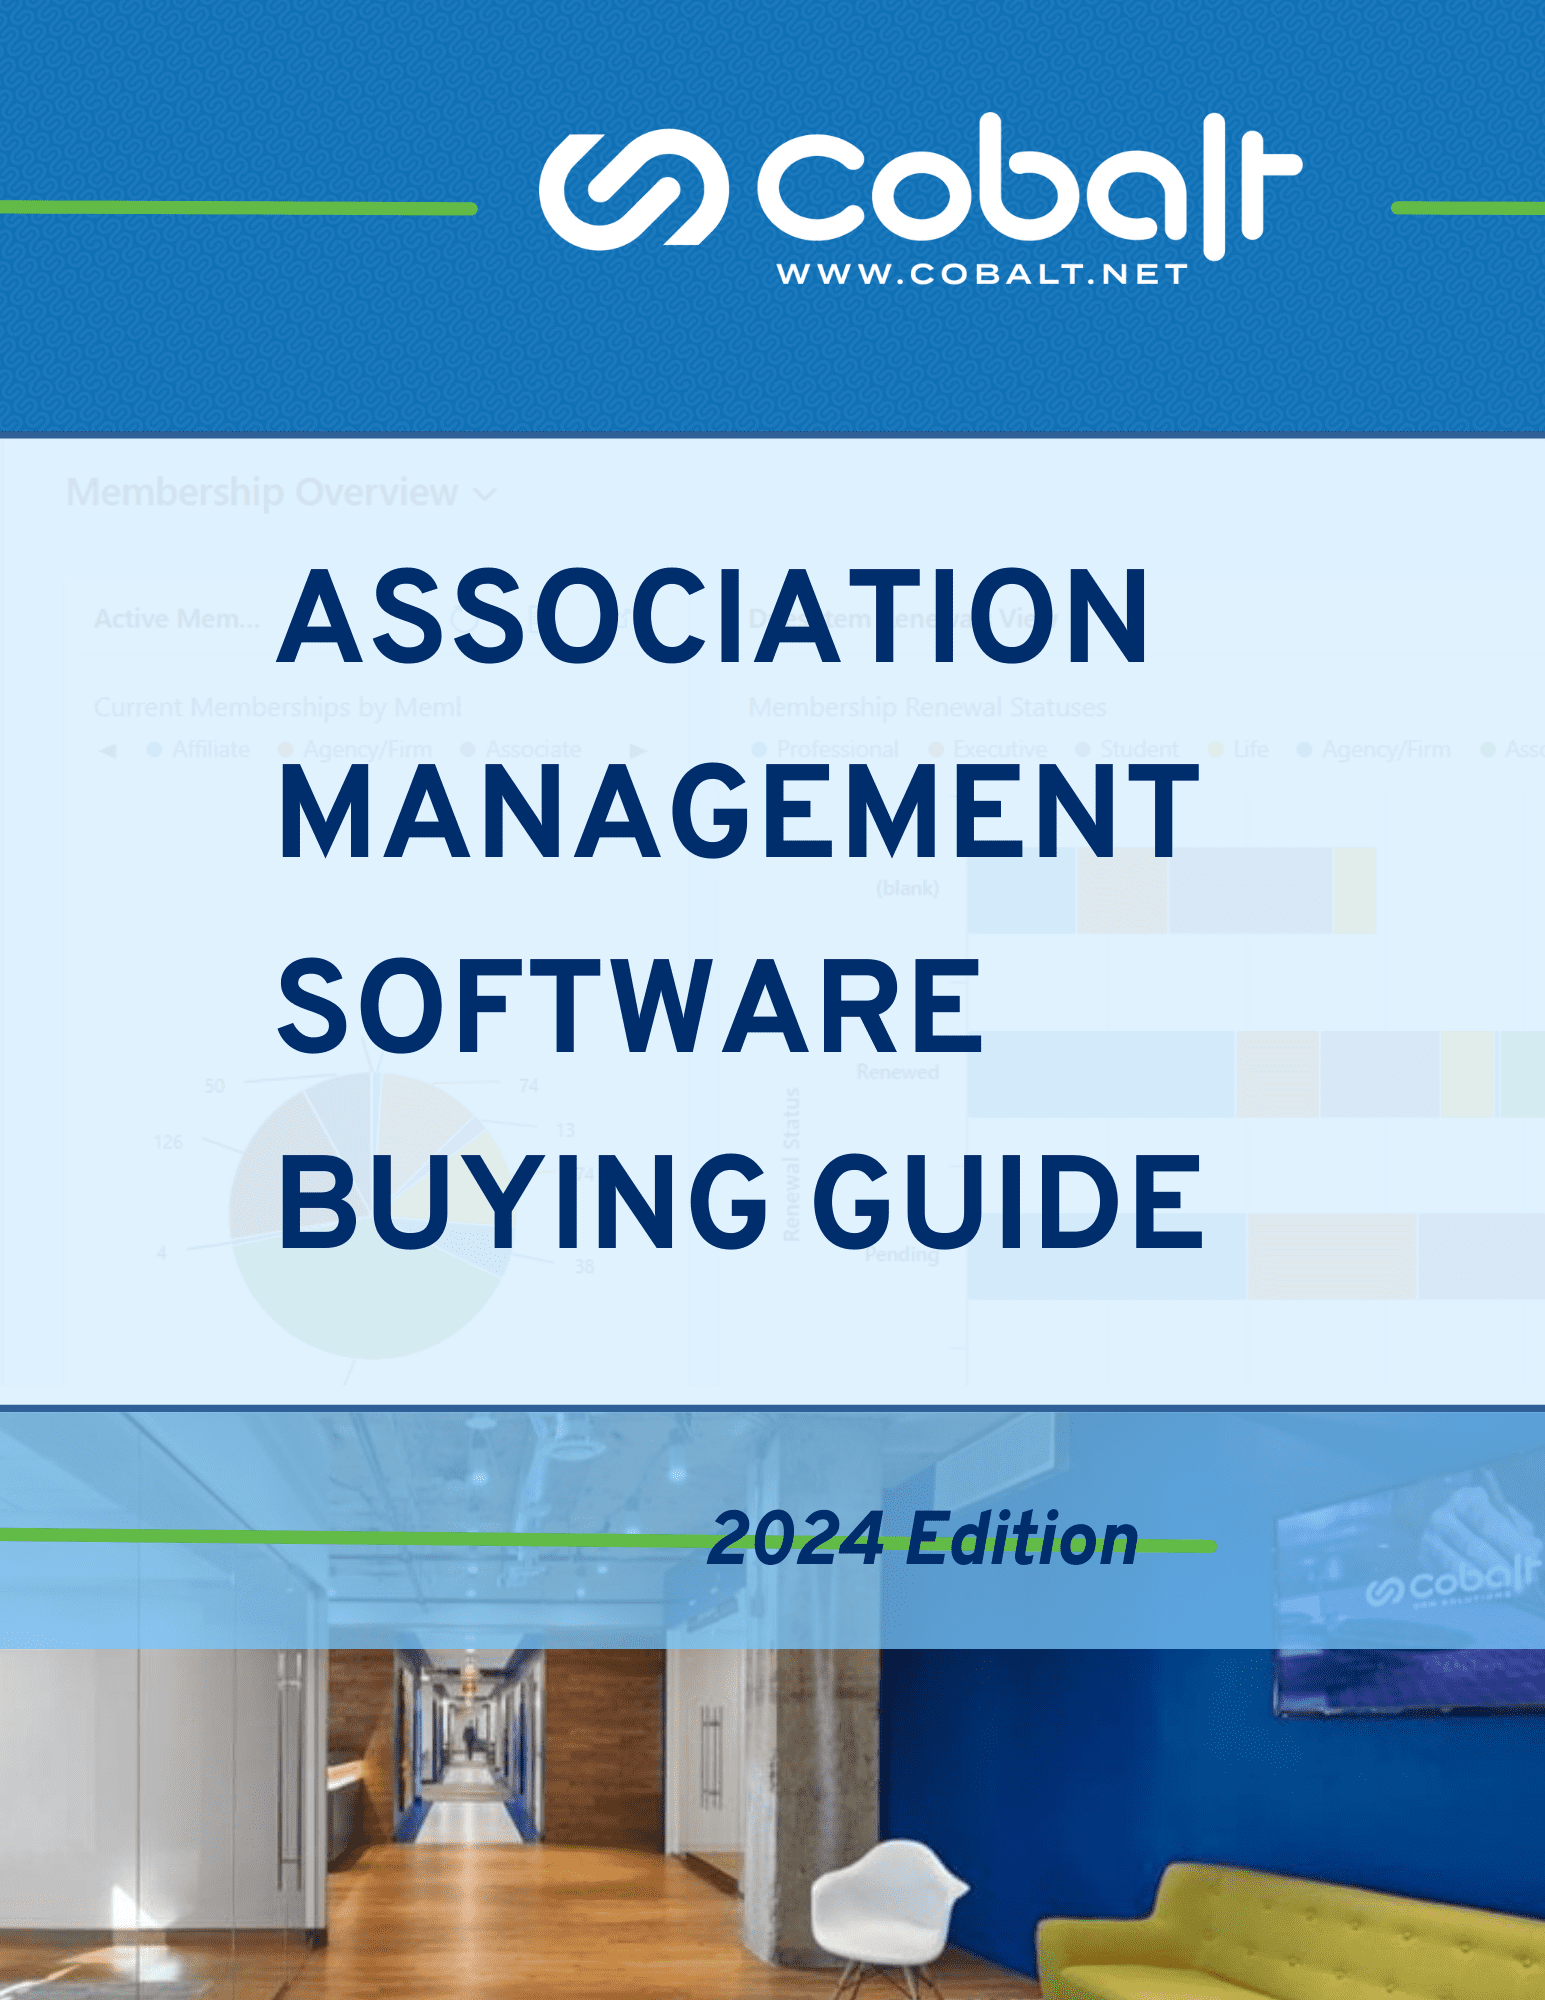 Association Management Software 2023 Buying Guide cover image. It includes a large version of Cobalt's logo, the AMS Buying Guide title, and photograph of Cobalt's Washington, D.C. lobby. 